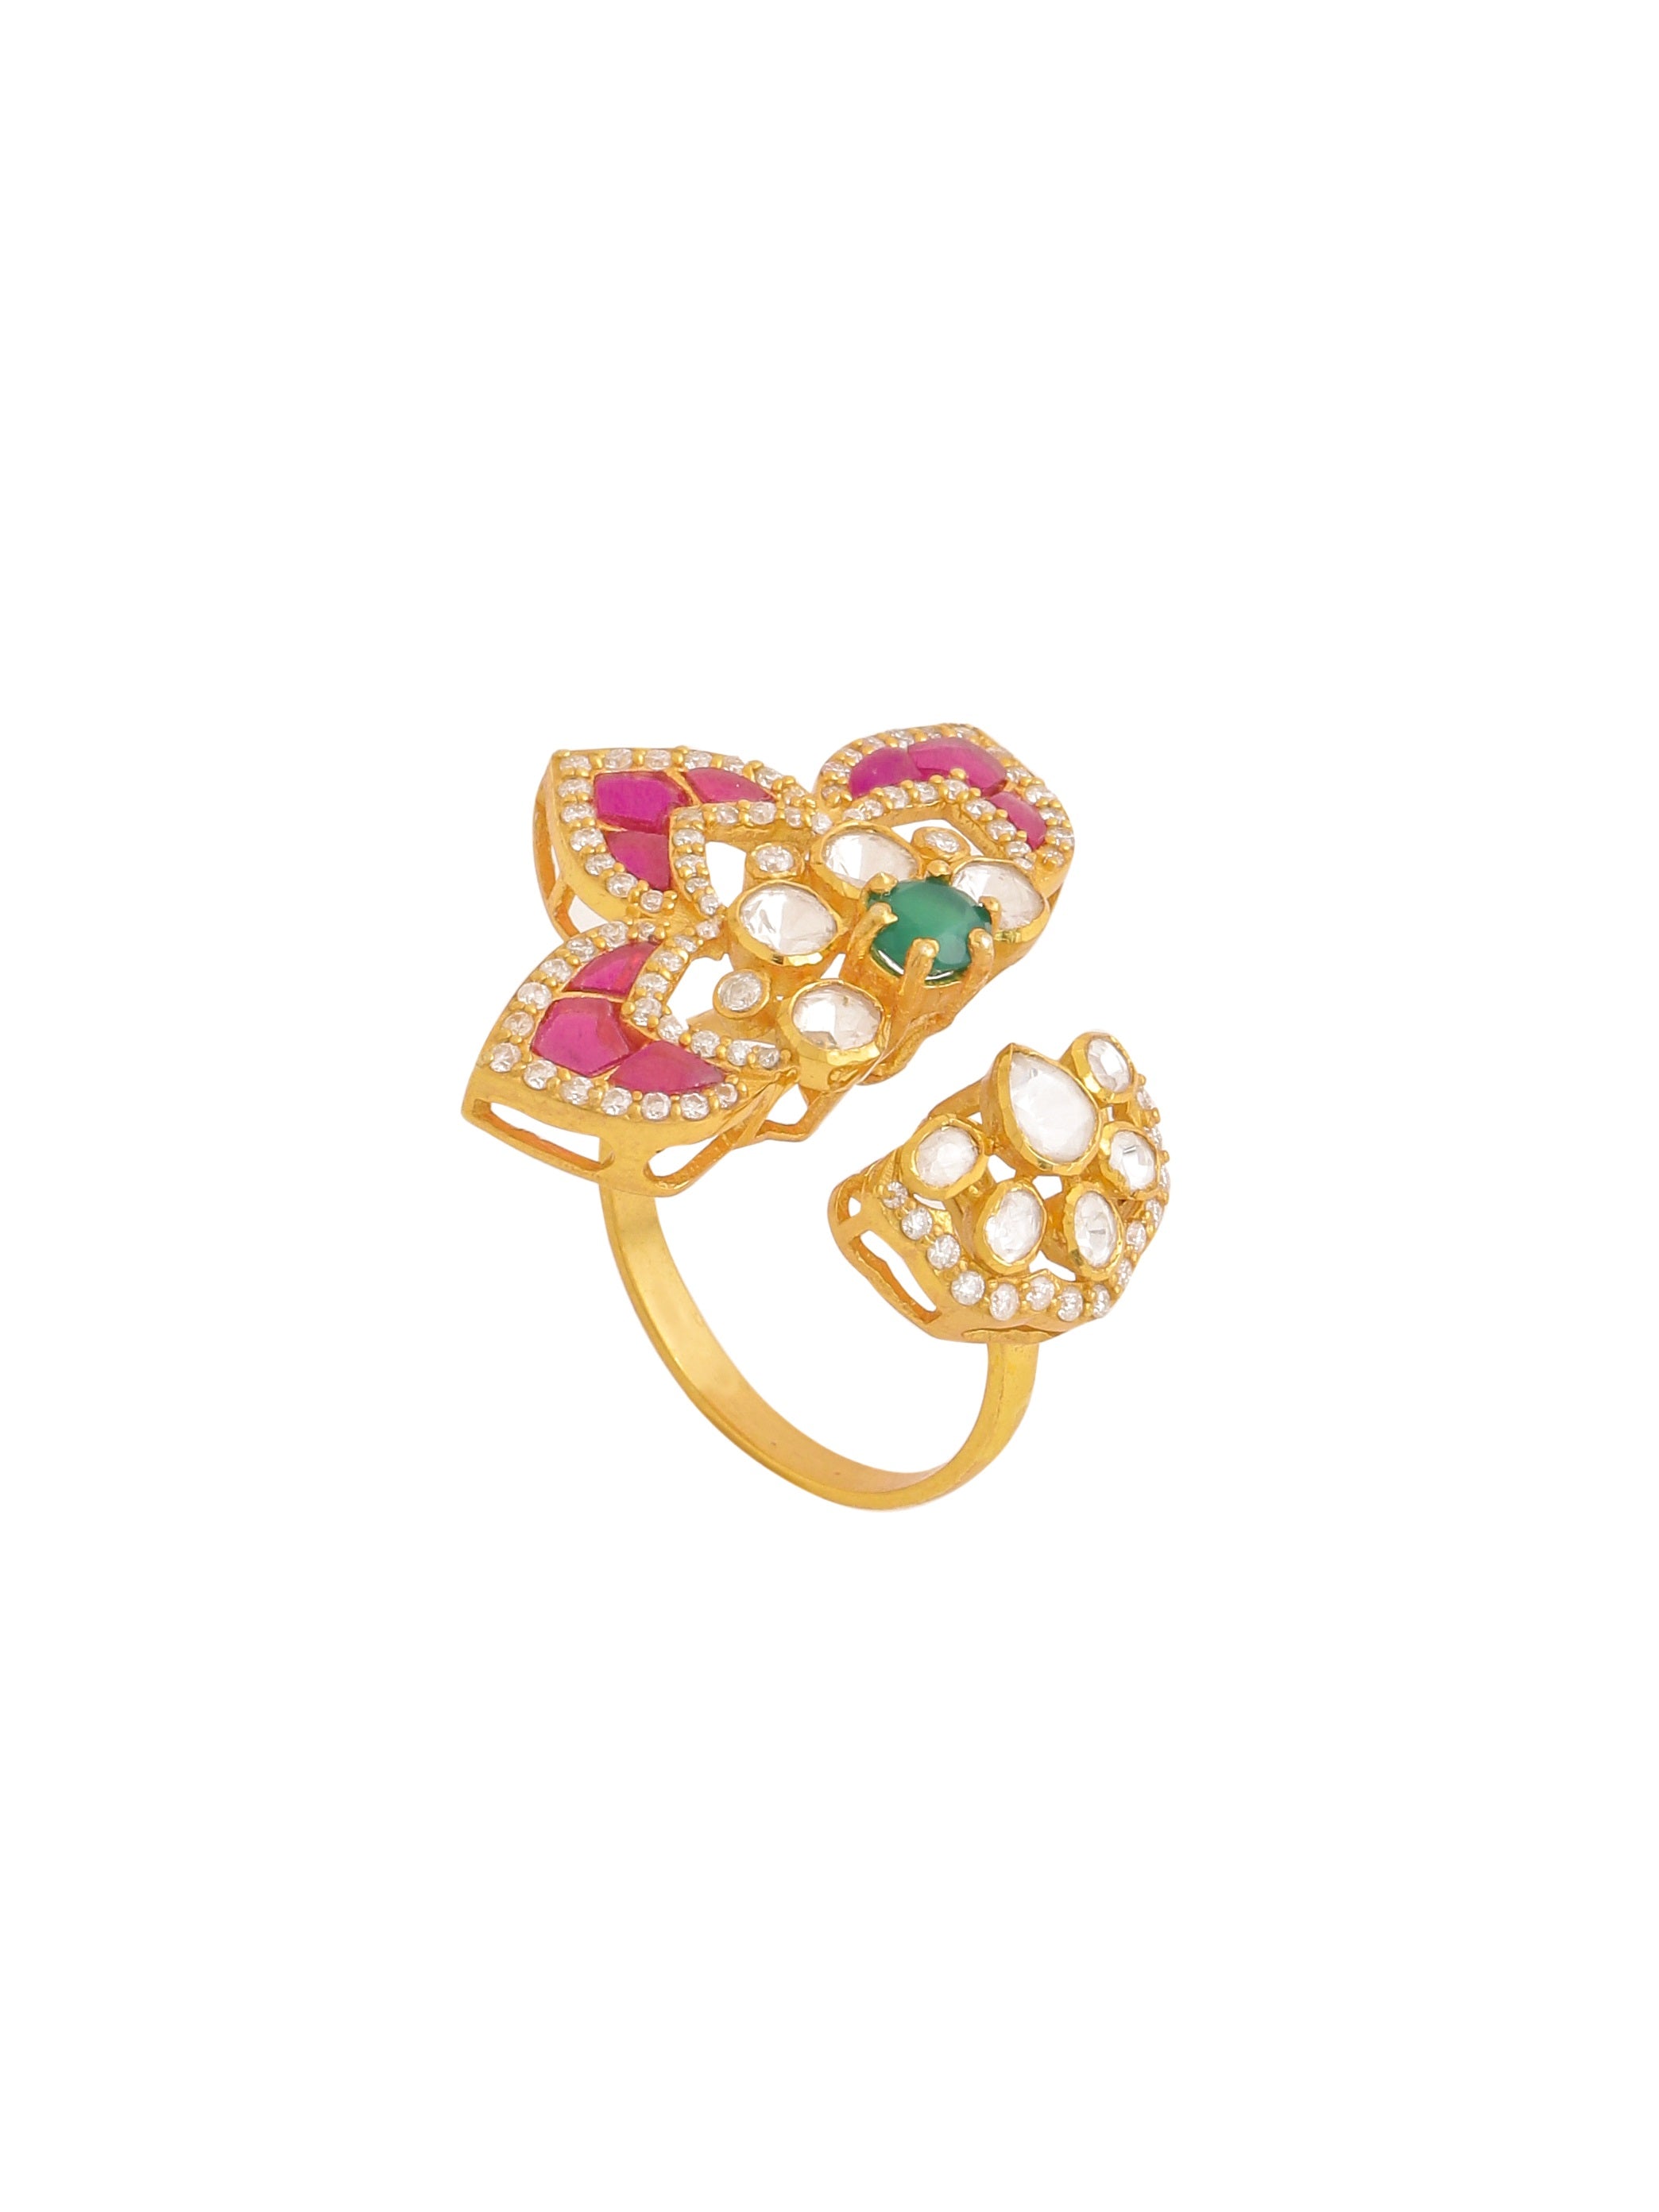 Pink Floral Glowing Ring